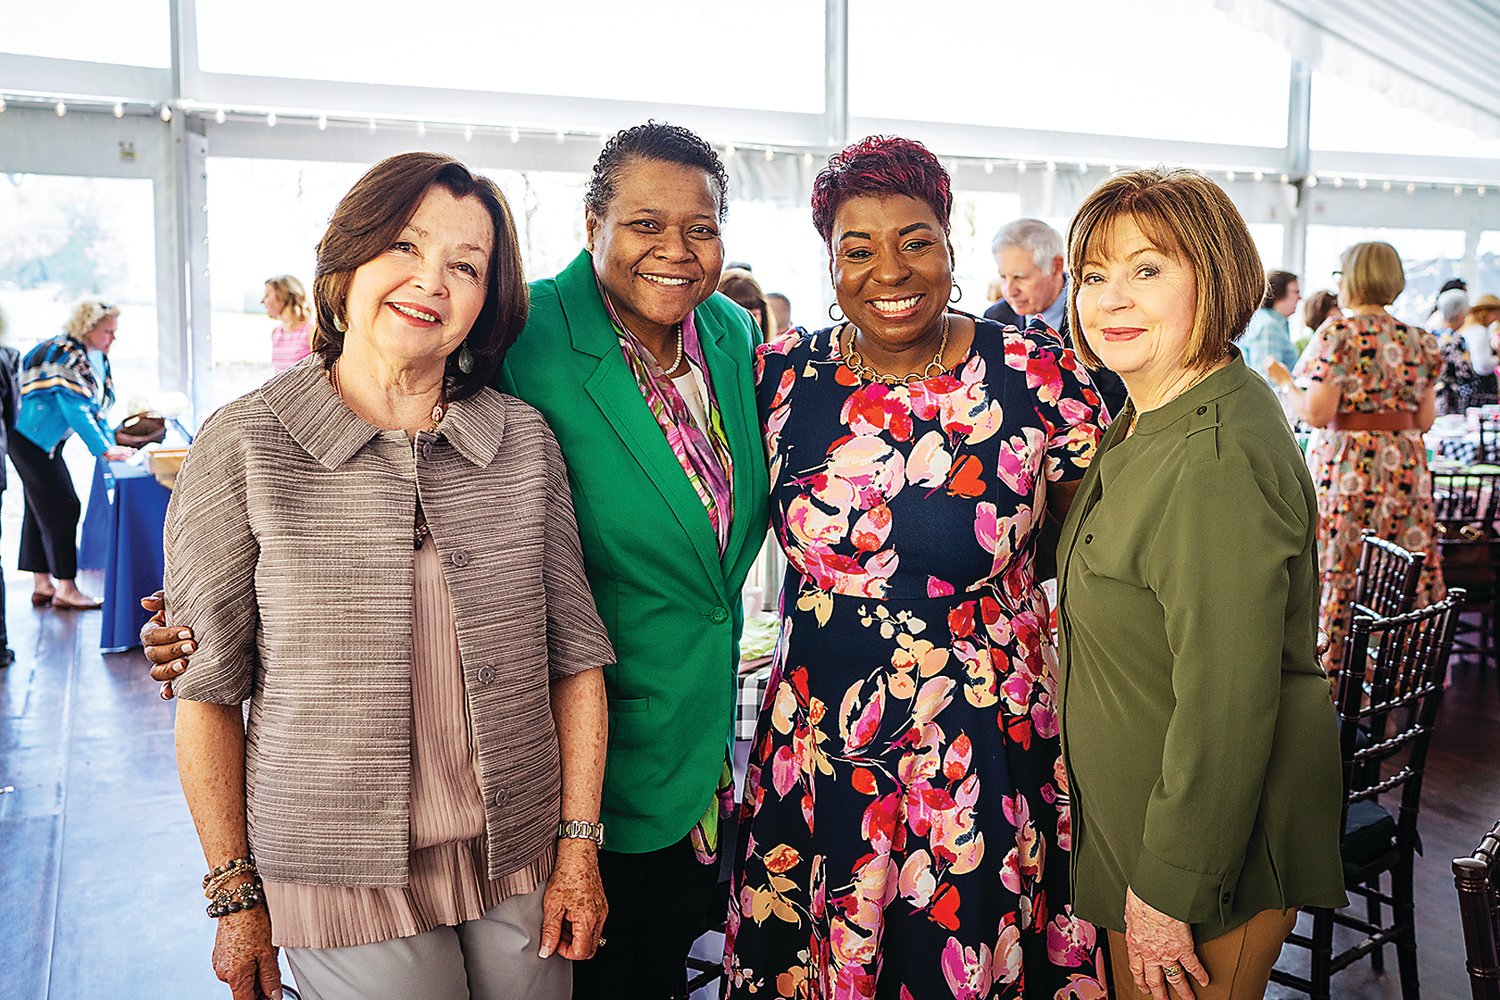 BCCC President Dr. Felicia L. Ganther, second from left, greets guests at the 2022 Salute to Mothers Scholarship Tea.